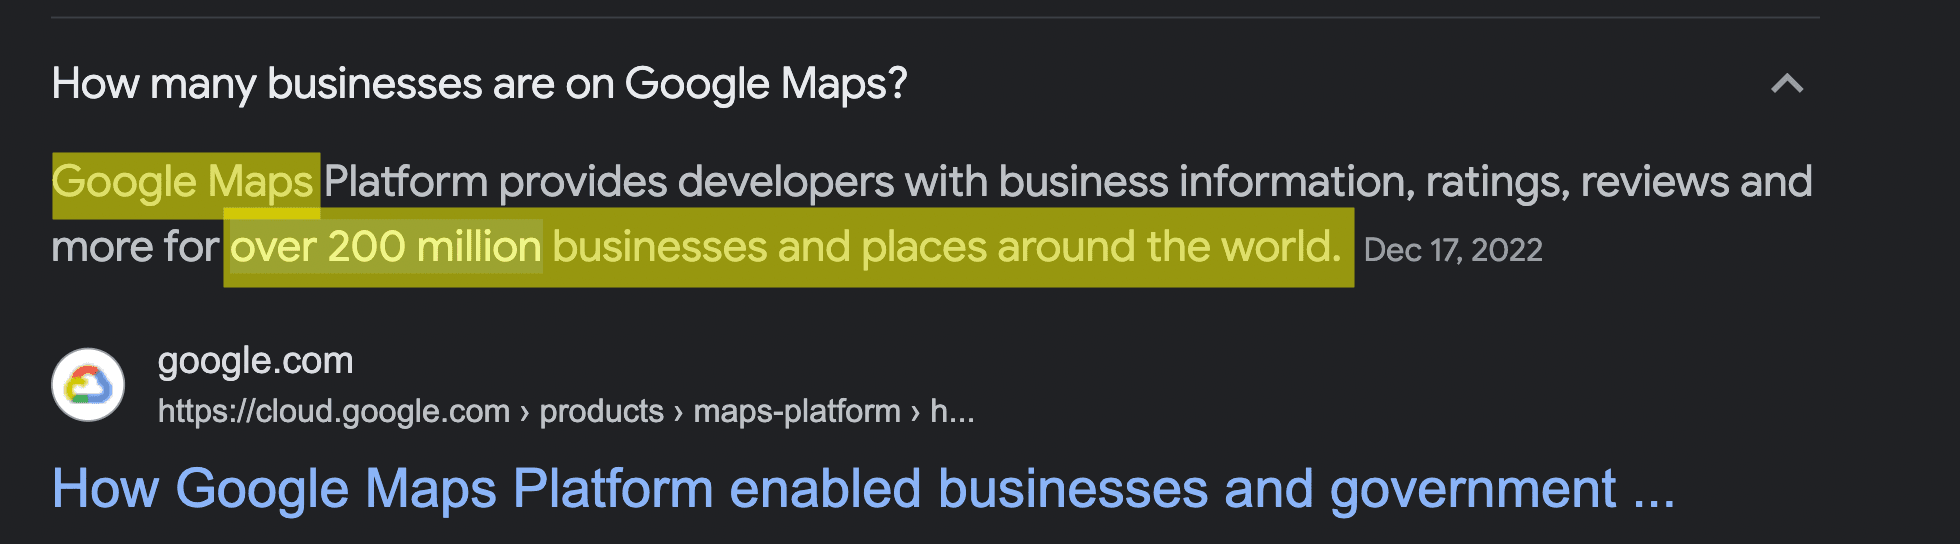 google maps total number of businesses worldwide - image4.png